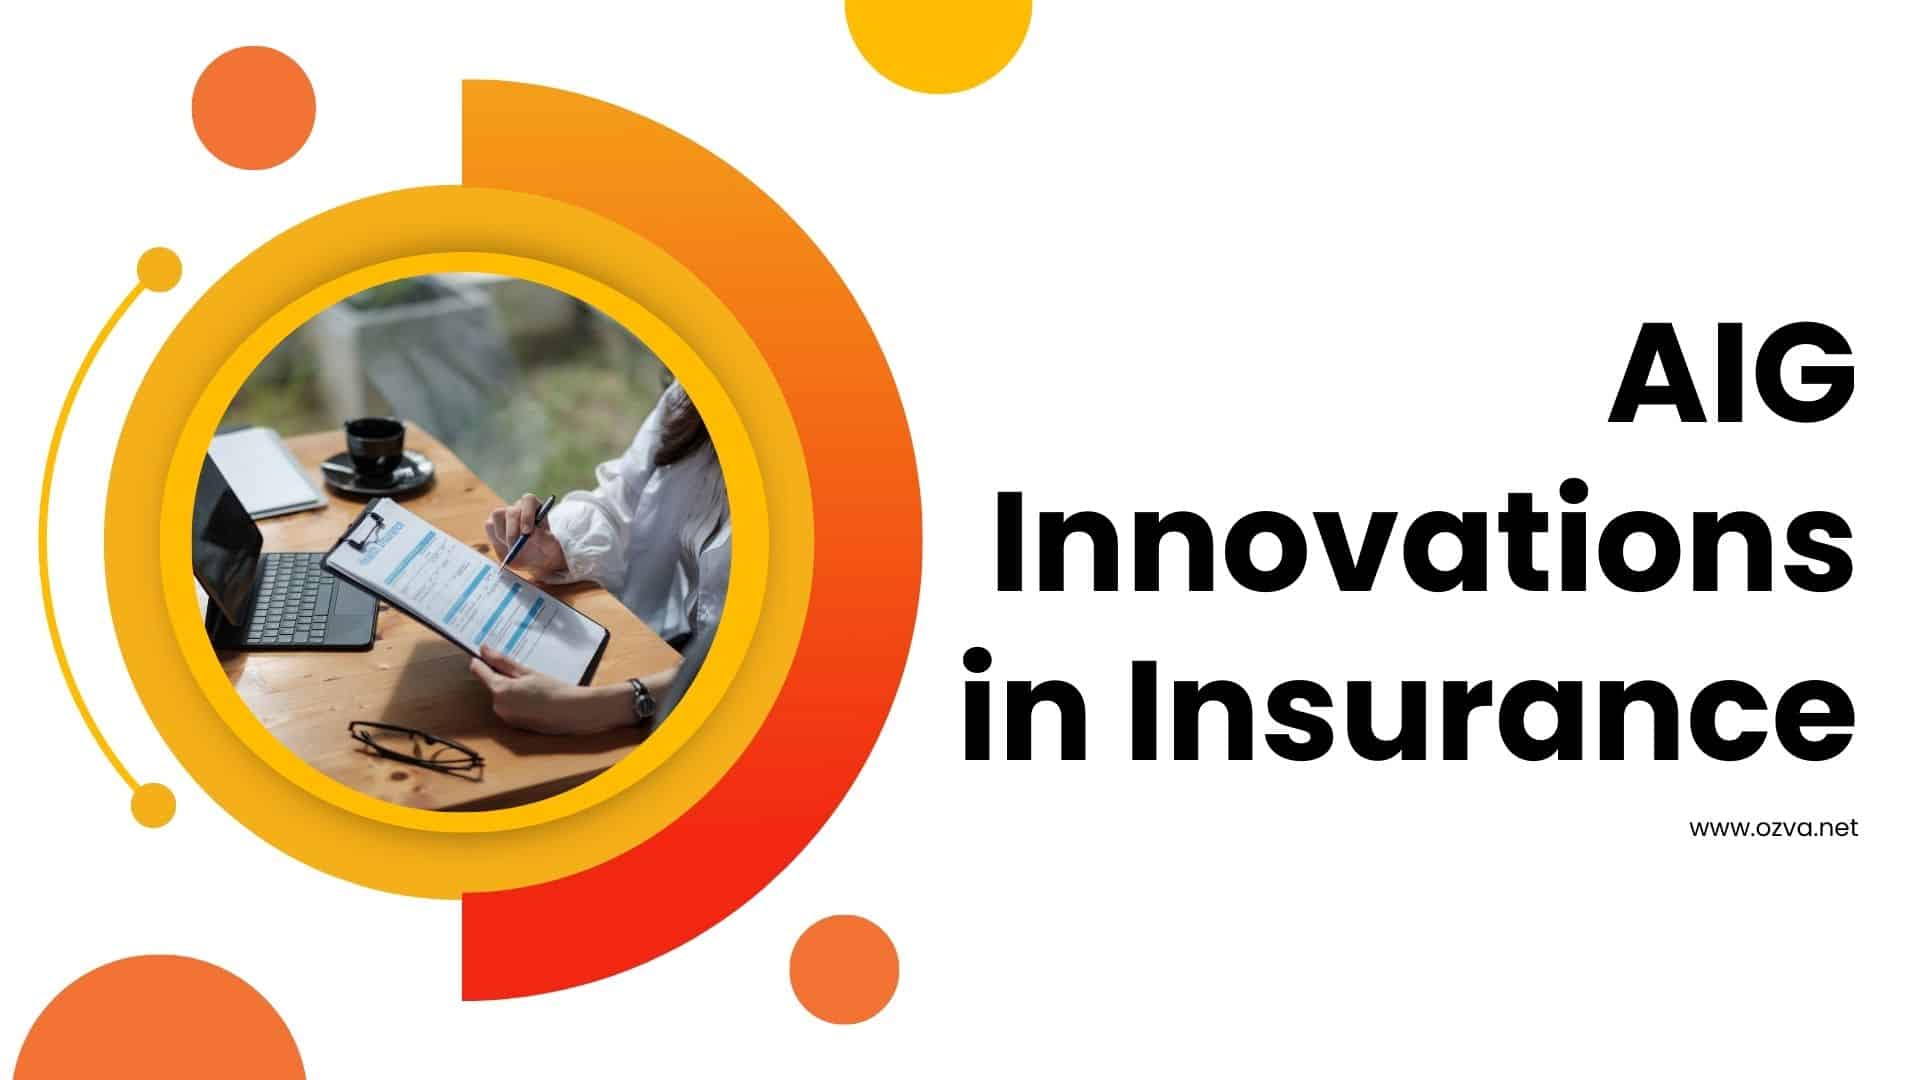 AIG Innovations in Insurance